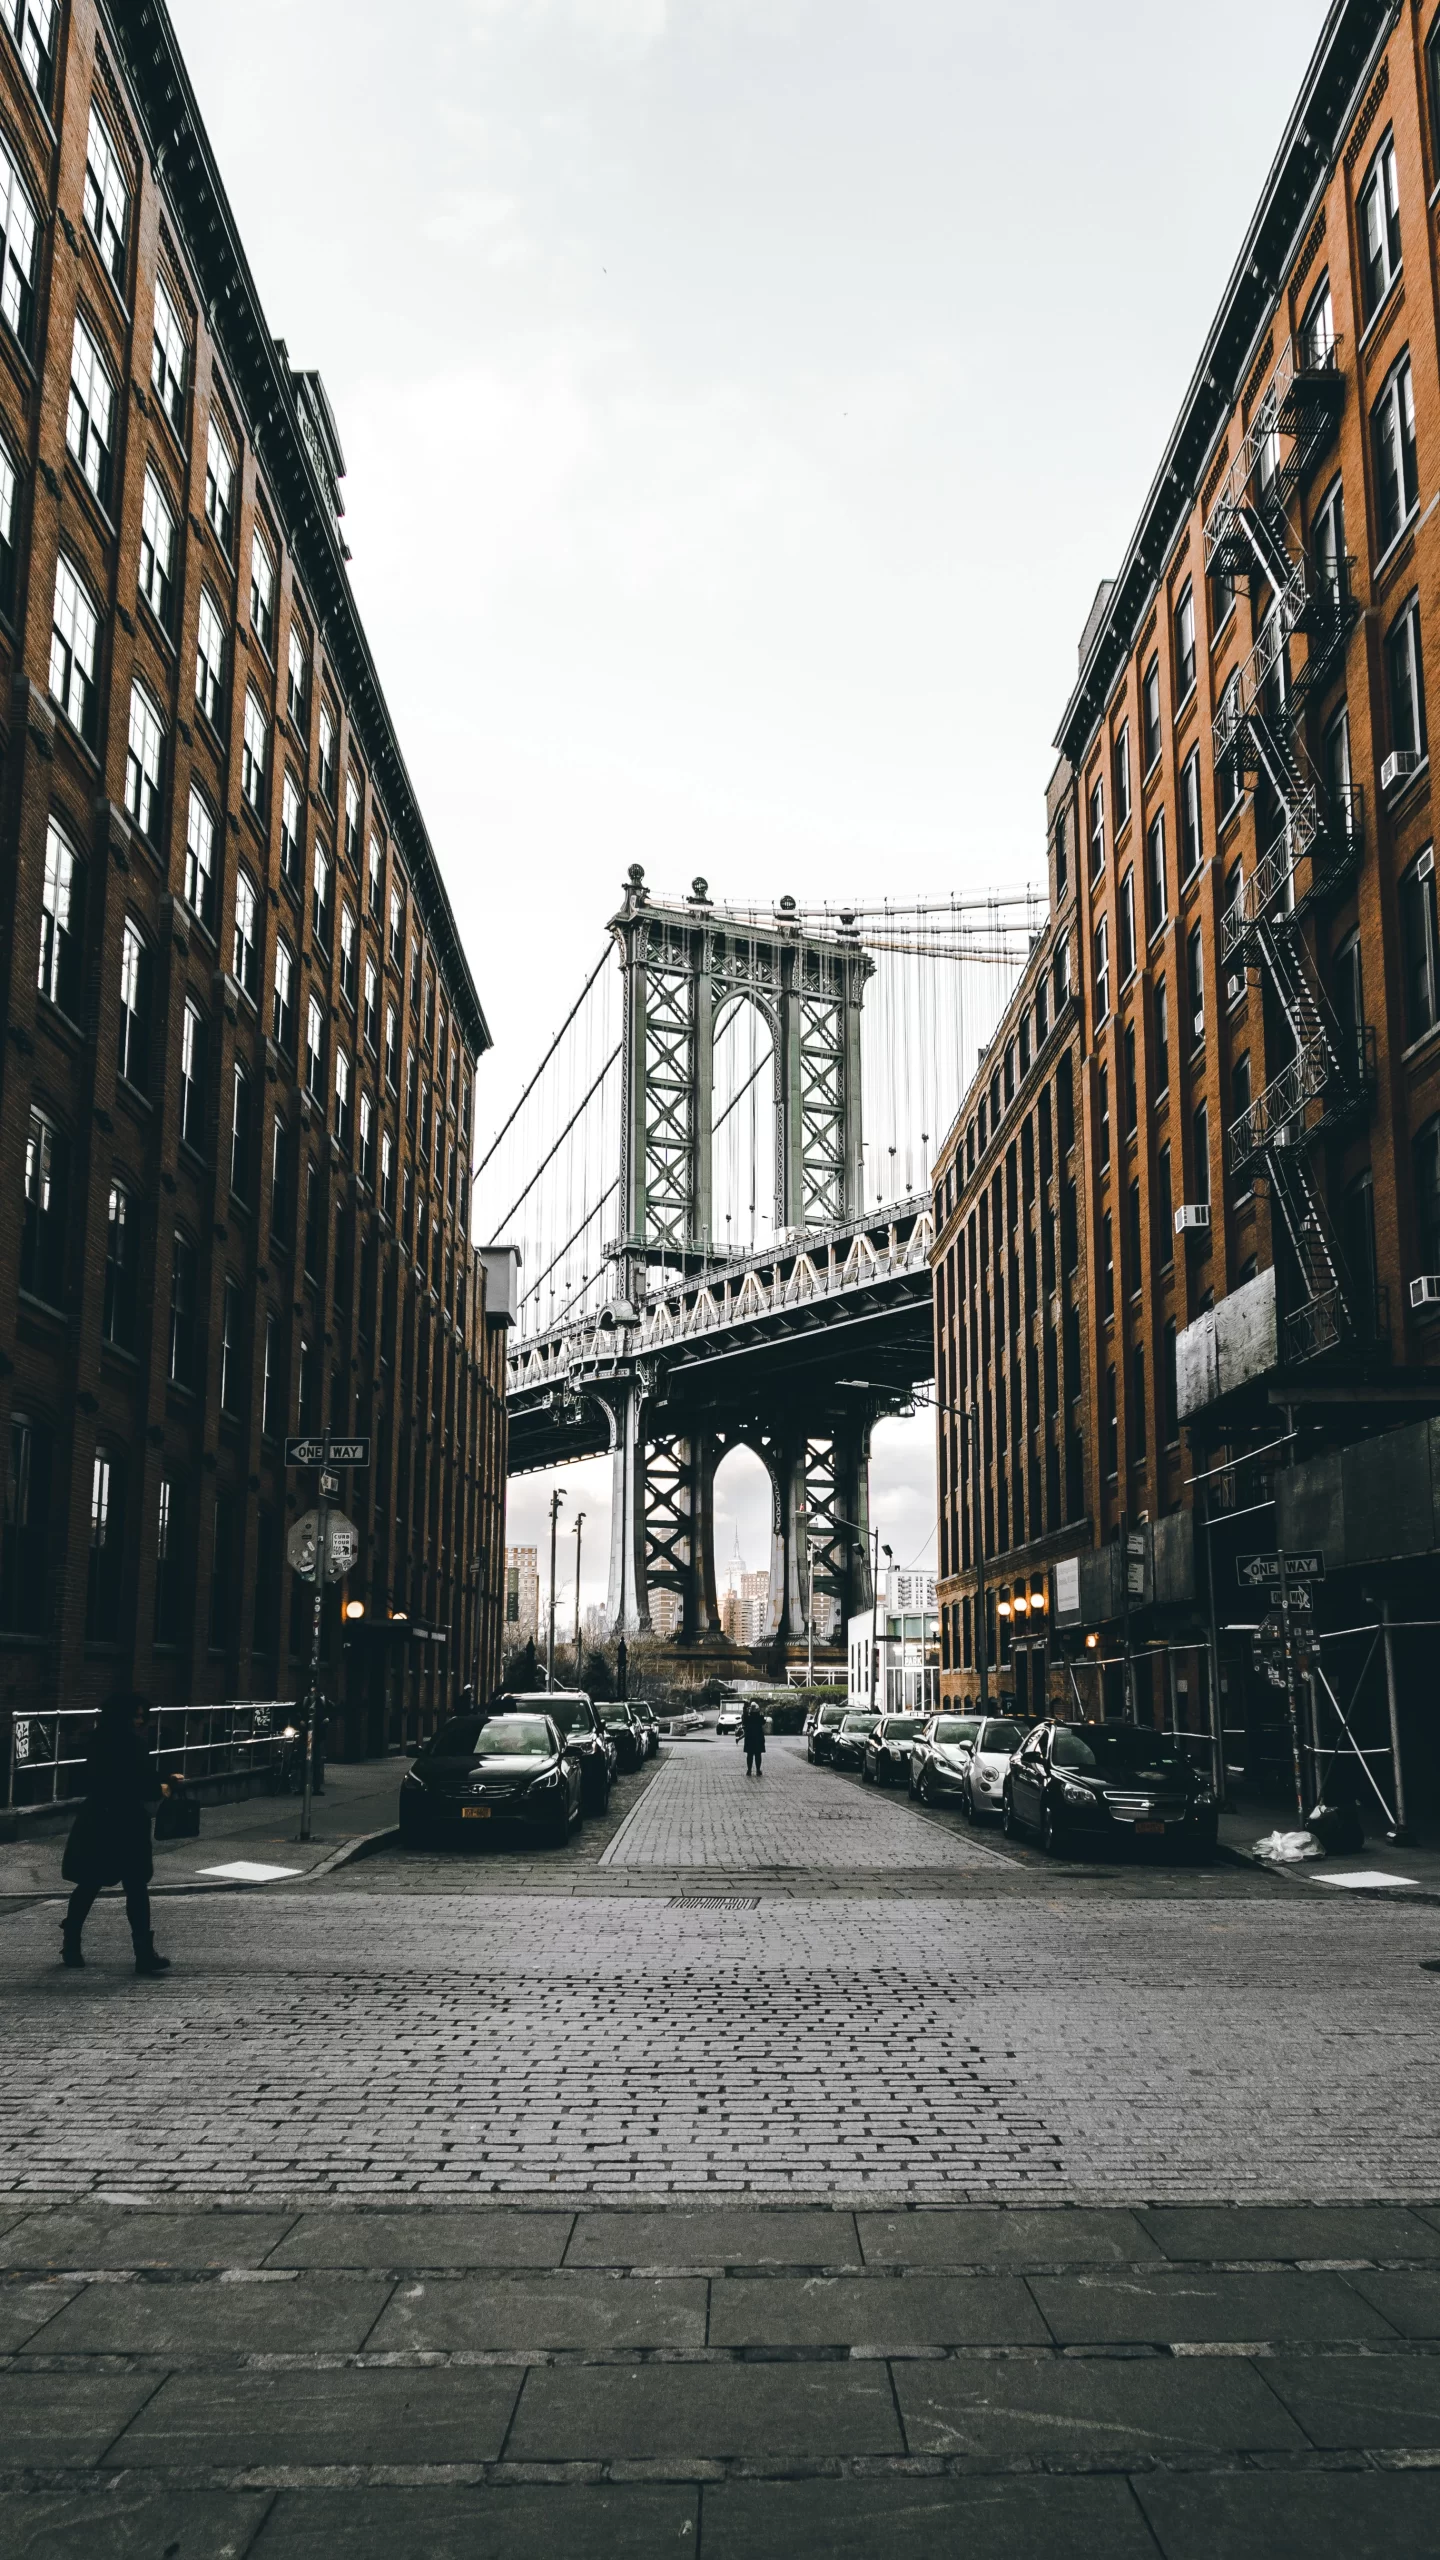 Published on September 21, 2019 SONY, ILCE-6300 Free to use under the Unsplash License Manhattan Bridge, Brooklyn - New York City - NY